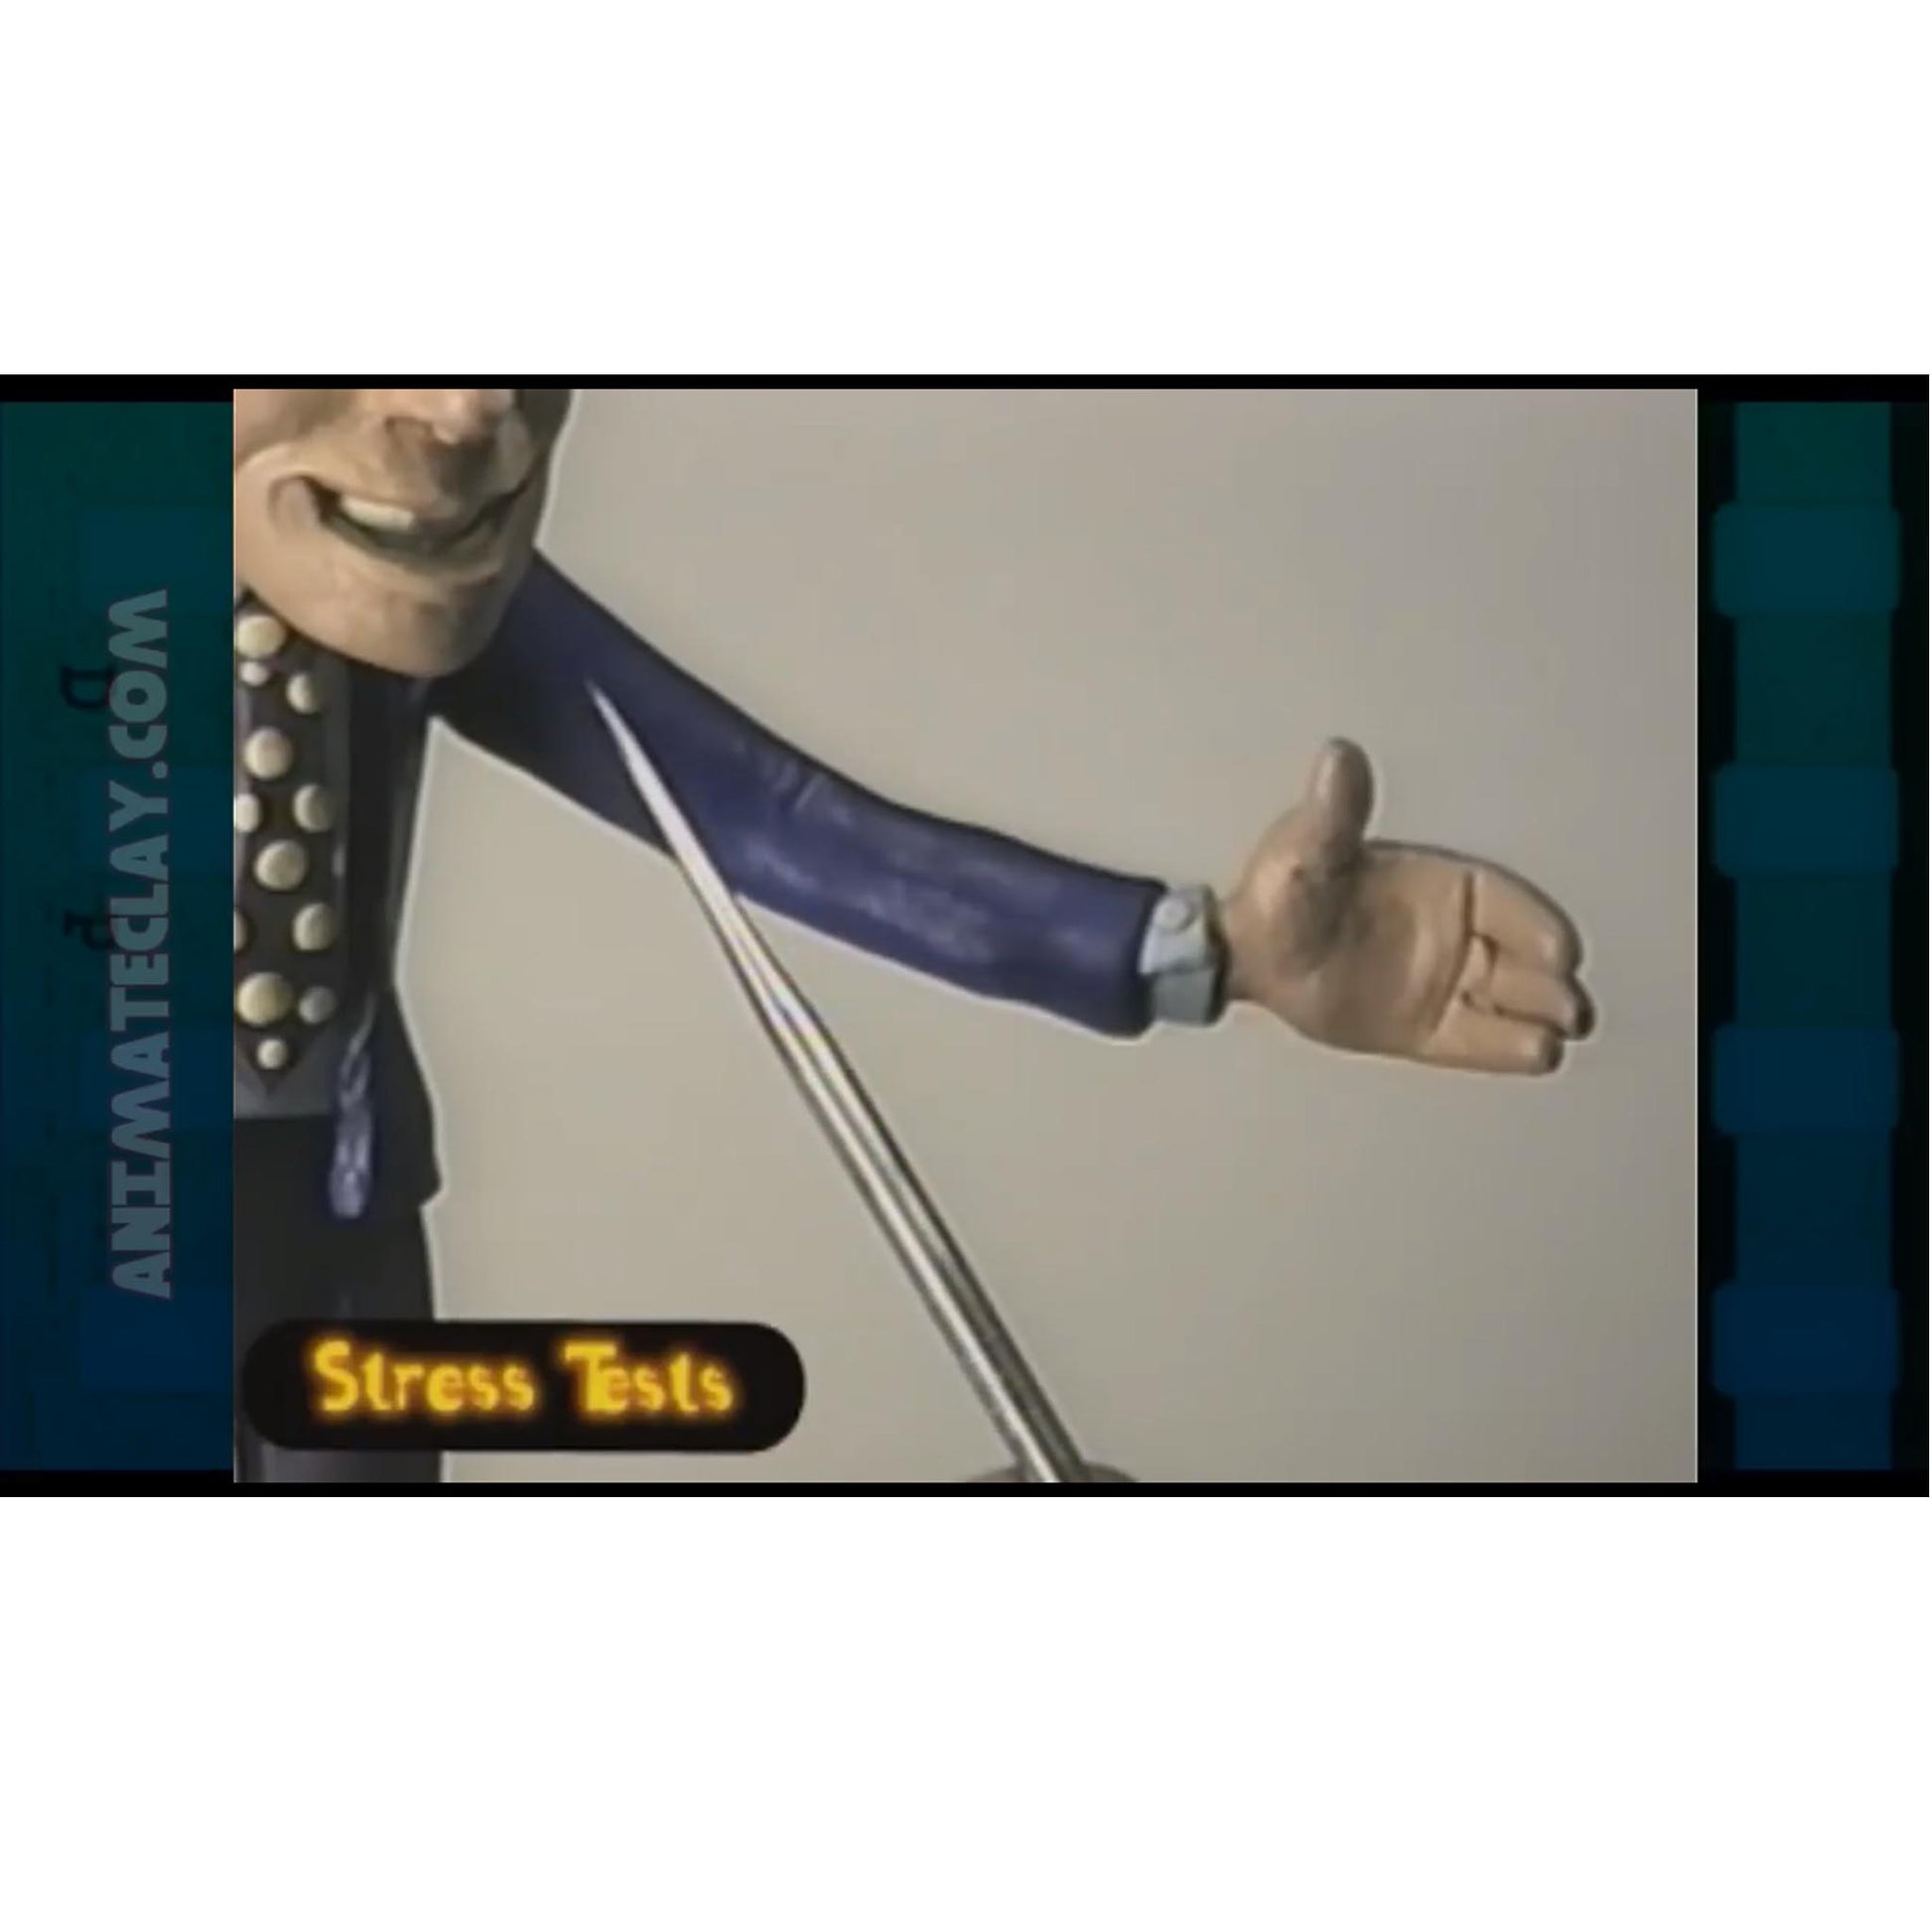 Marc shows how to stress test your puppet to see if it will work well for animation.